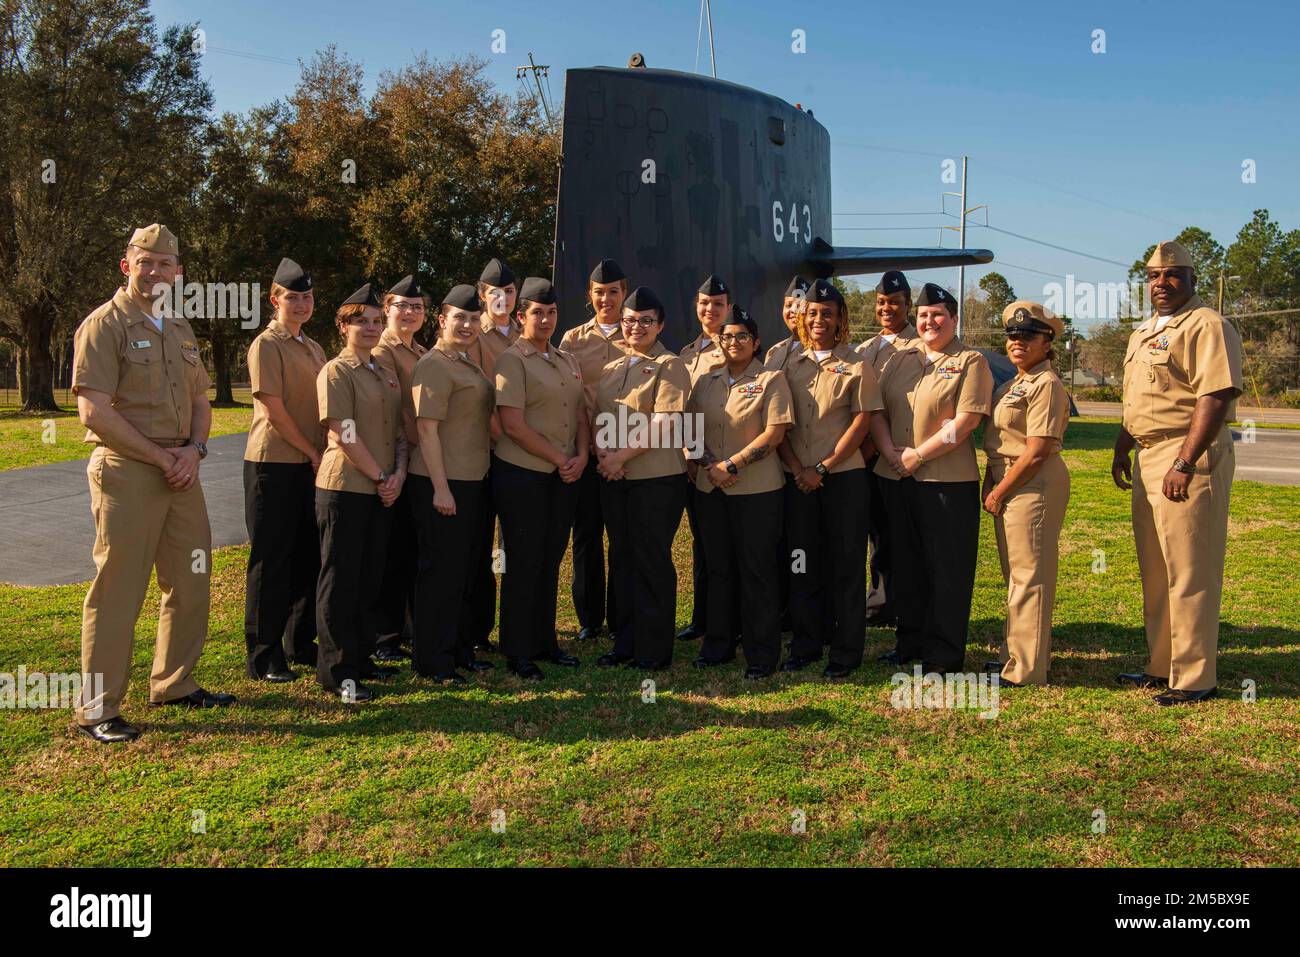 KINGS BAY, Ga. (Feb. 24, 2022) Lt. Cmdr. Jeremy Carroll (left), executive officer of the Ohio-class ballistic-missile submarine USS Wyoming (SSBN 742), and Master Chief Sonar Technician (Submarines) Myron Williams (right), chief of the boat, stand with the enlisted women assigned to the ship’s Blue Crew at the USS Bancroft static display outside of the gate at Naval Submarine Base Kings Bay, Georgia. The 15 female submariners recently made history when they became the first enlisted female crew to complete a ballistic-missile submarine deterrent patrol. Wyoming is homeported at the base which Stock Photo